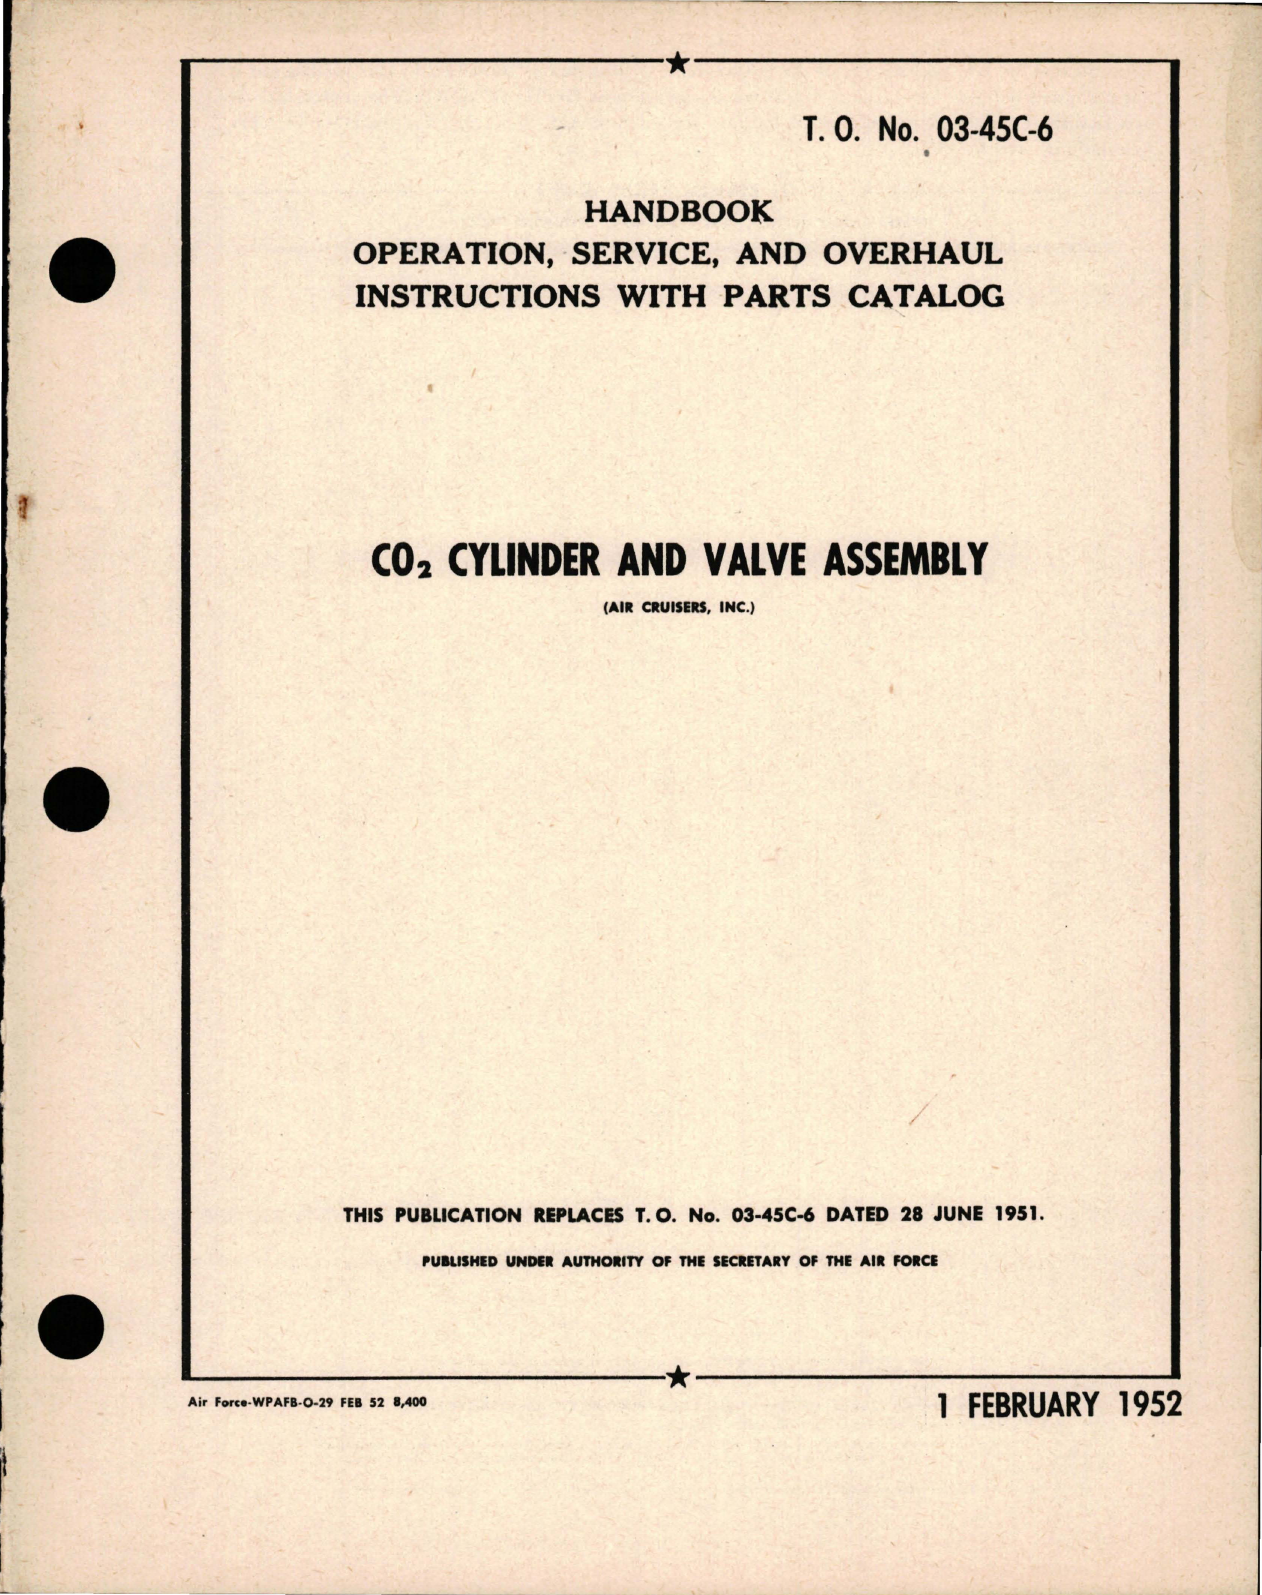 Sample page 1 from AirCorps Library document: Operation, Service and Overhaul Instructions with Parts Catalog for CO2 Cylinder and Valve Assembly